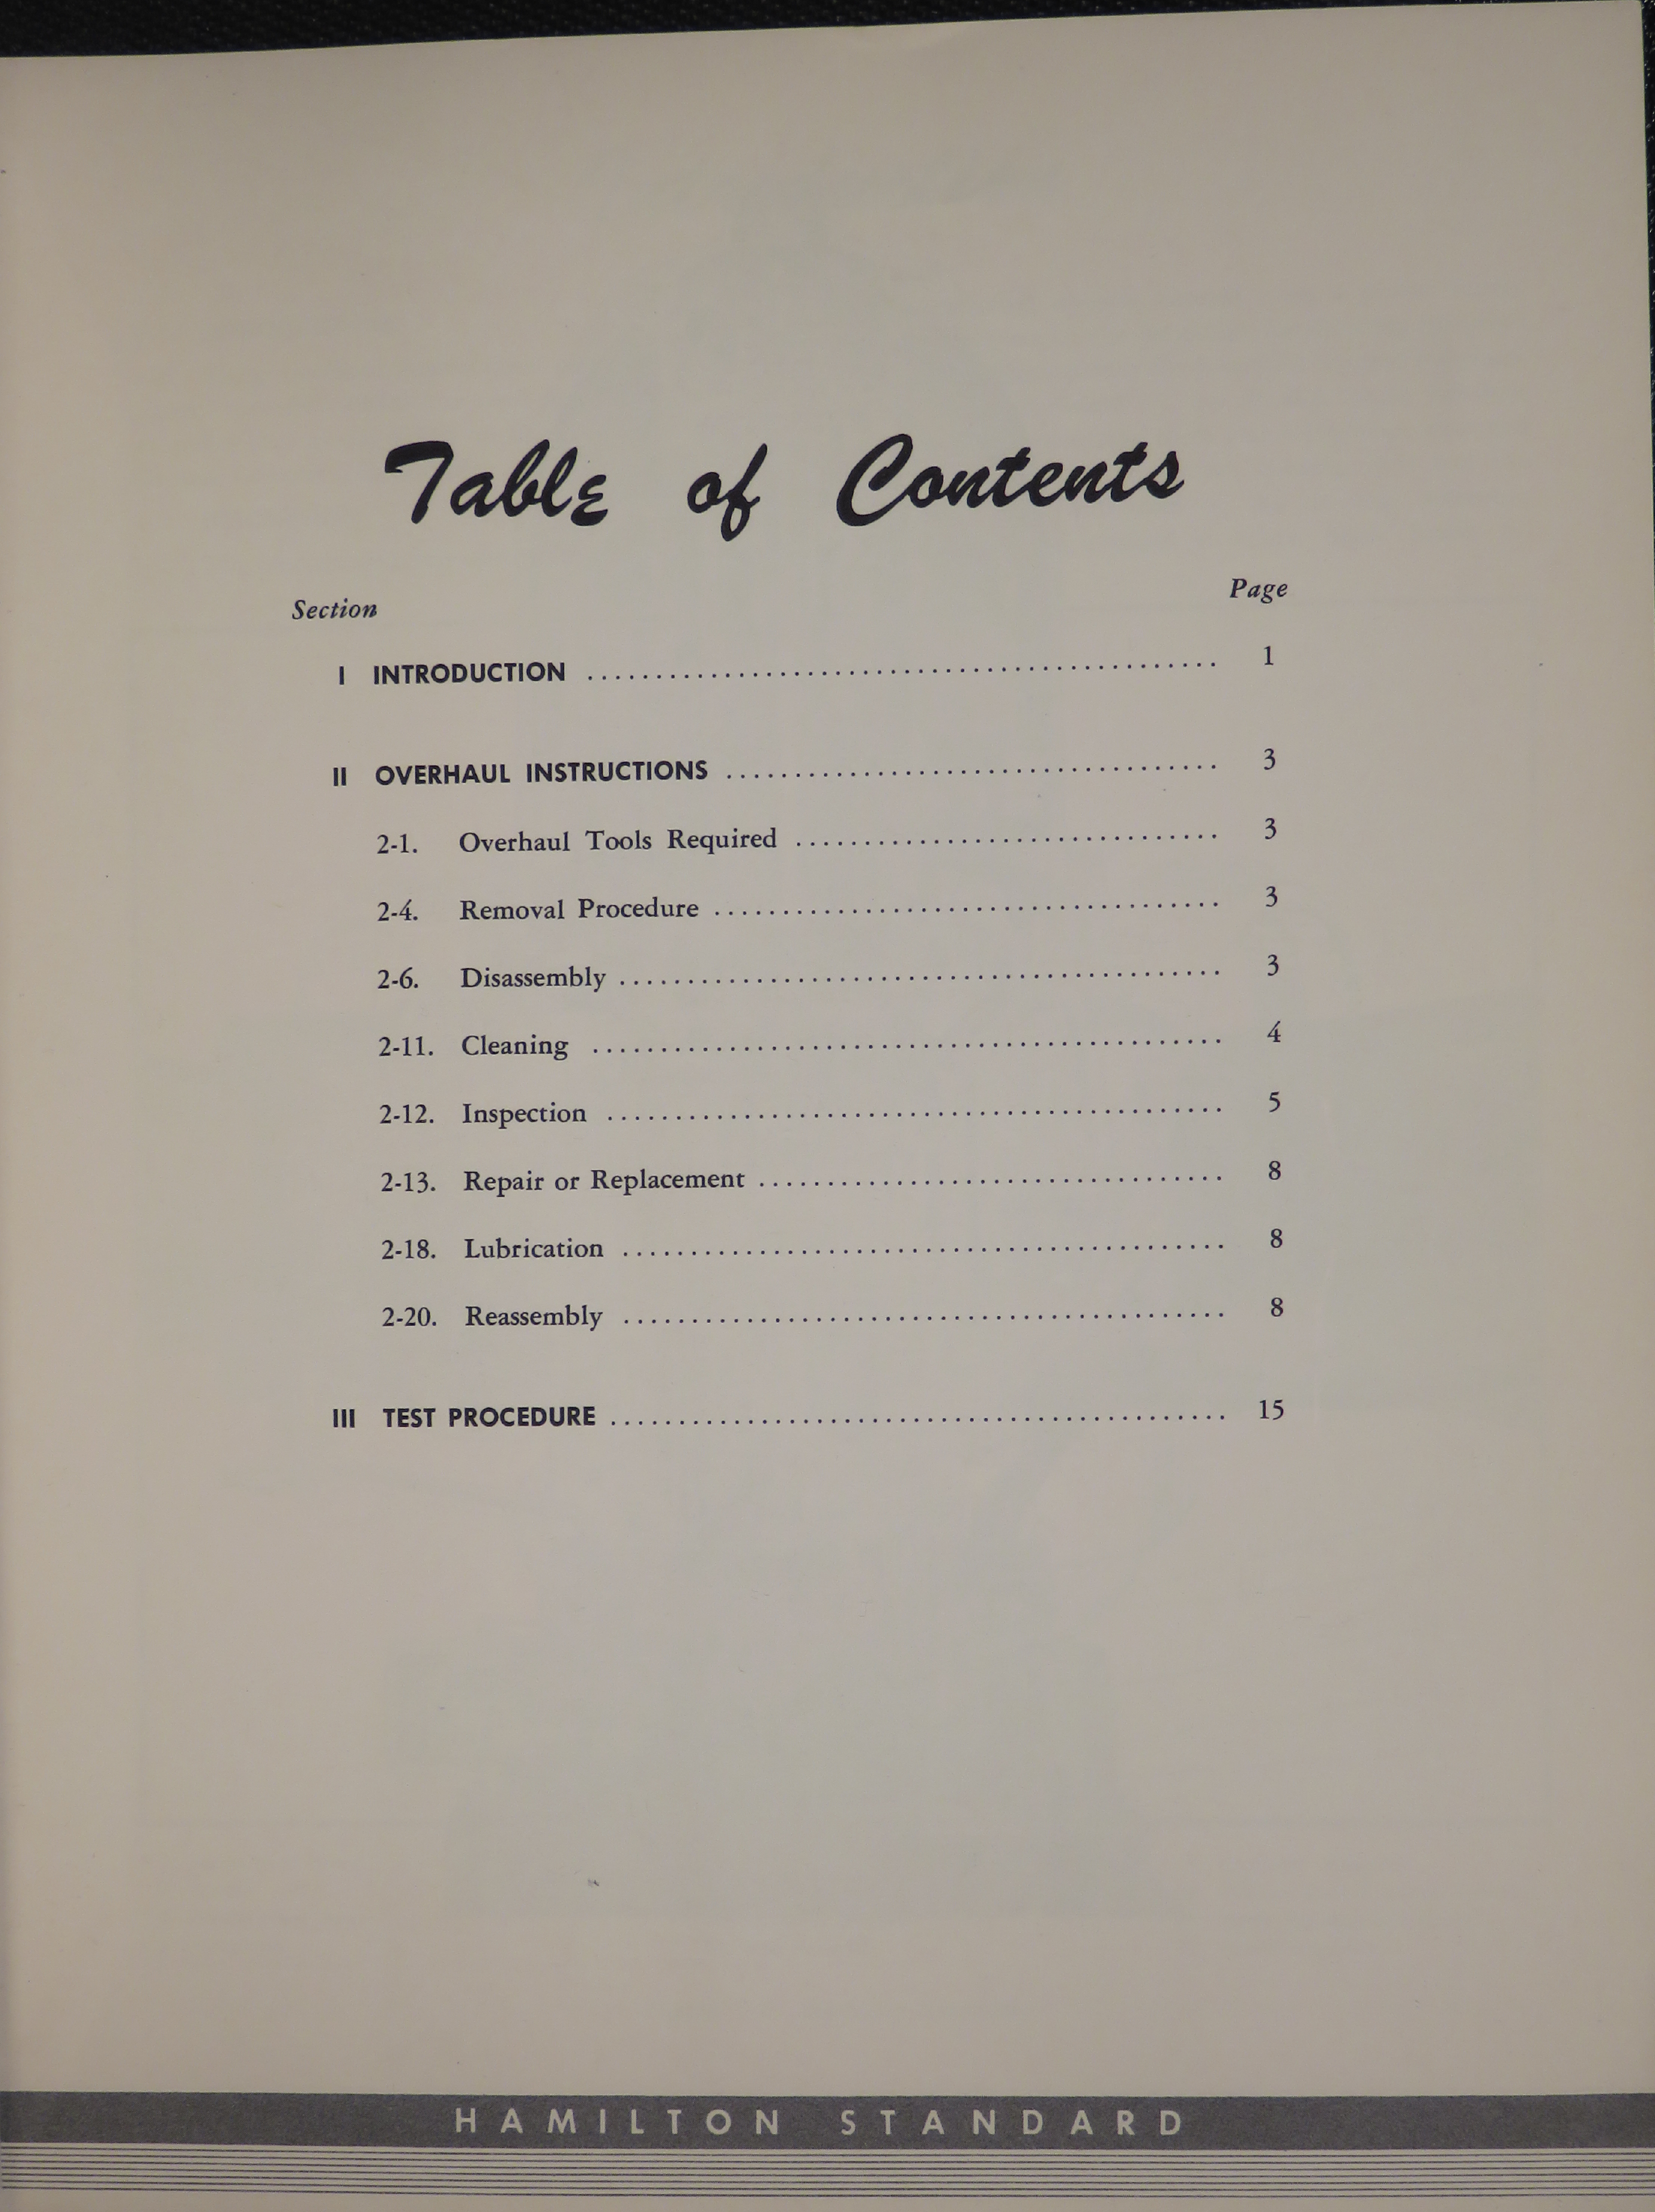 Sample page 5 from AirCorps Library document: Overhaul Manual for Hamilton Standard Model 43E60 Electric Deicing Assemblies